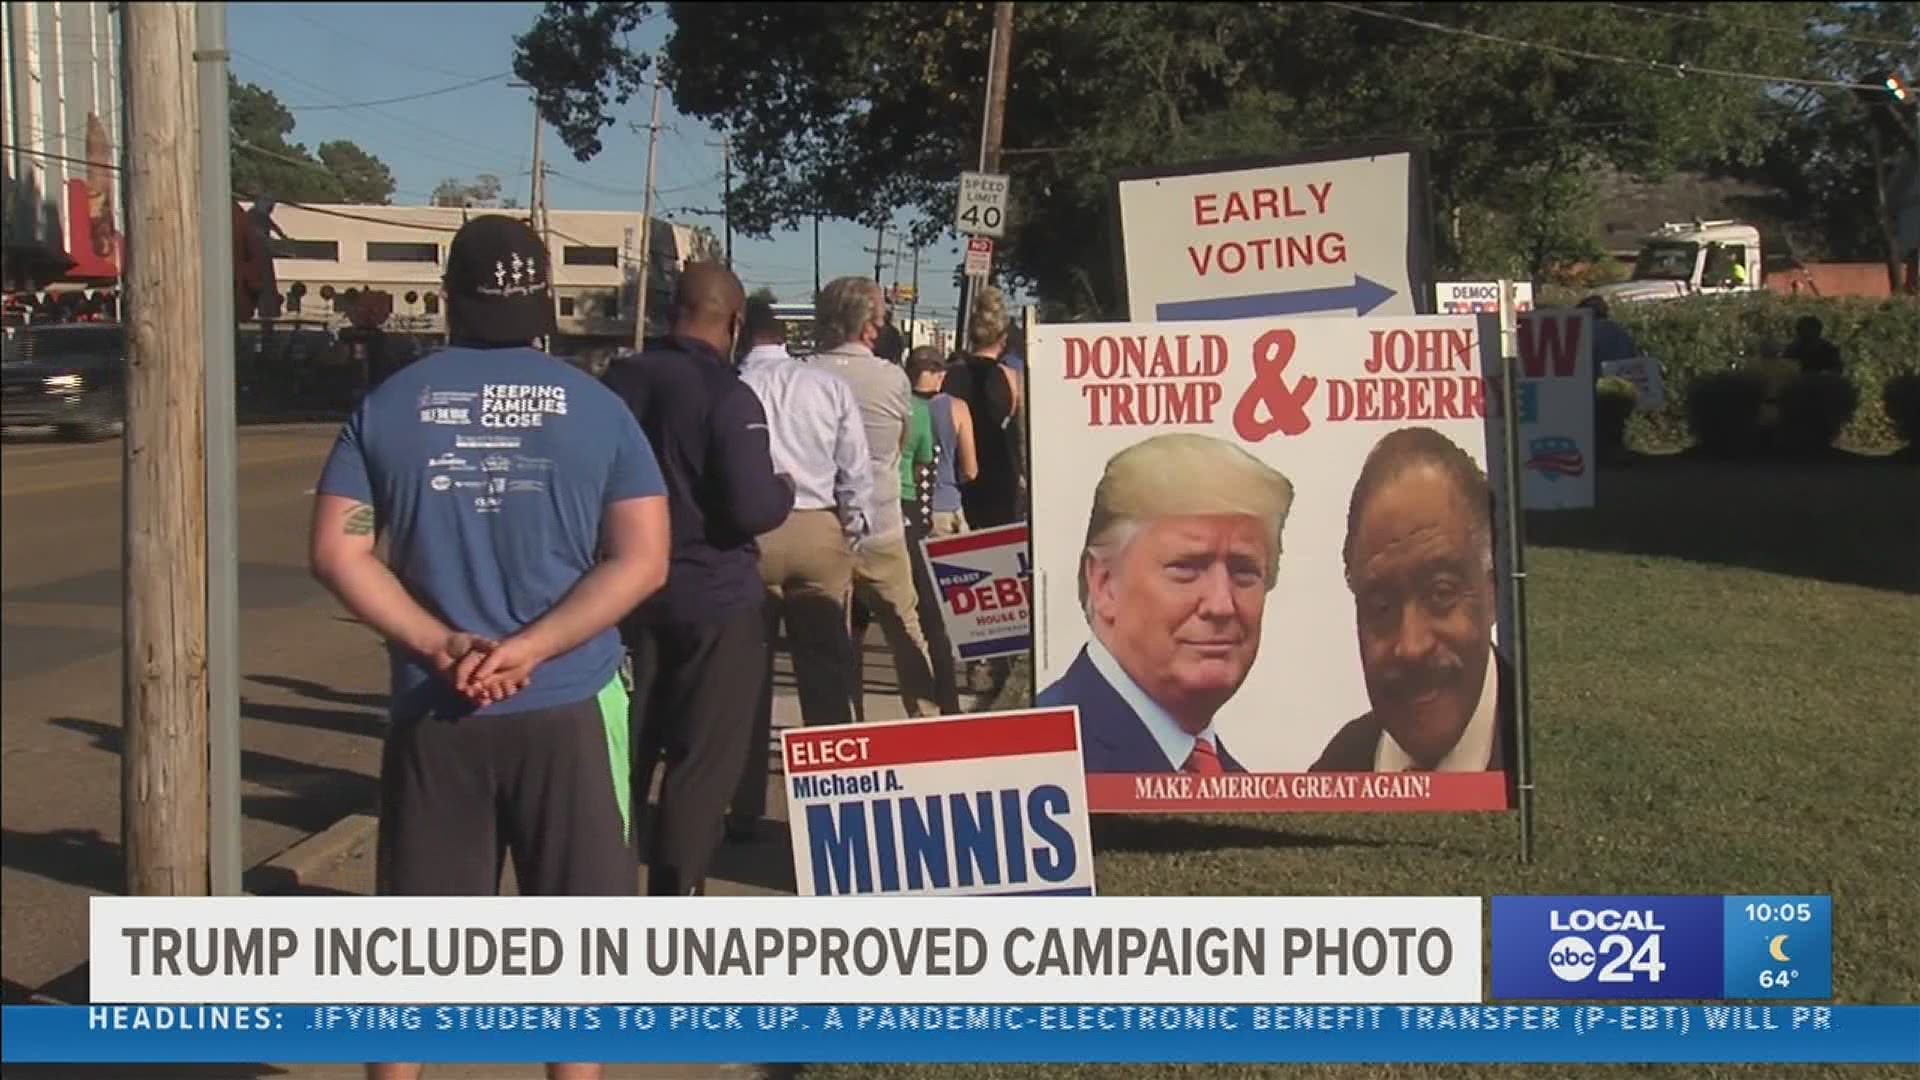 Political signs of State Representative John DeBerry and President Trump have appeared at several early voting locations in Memphis